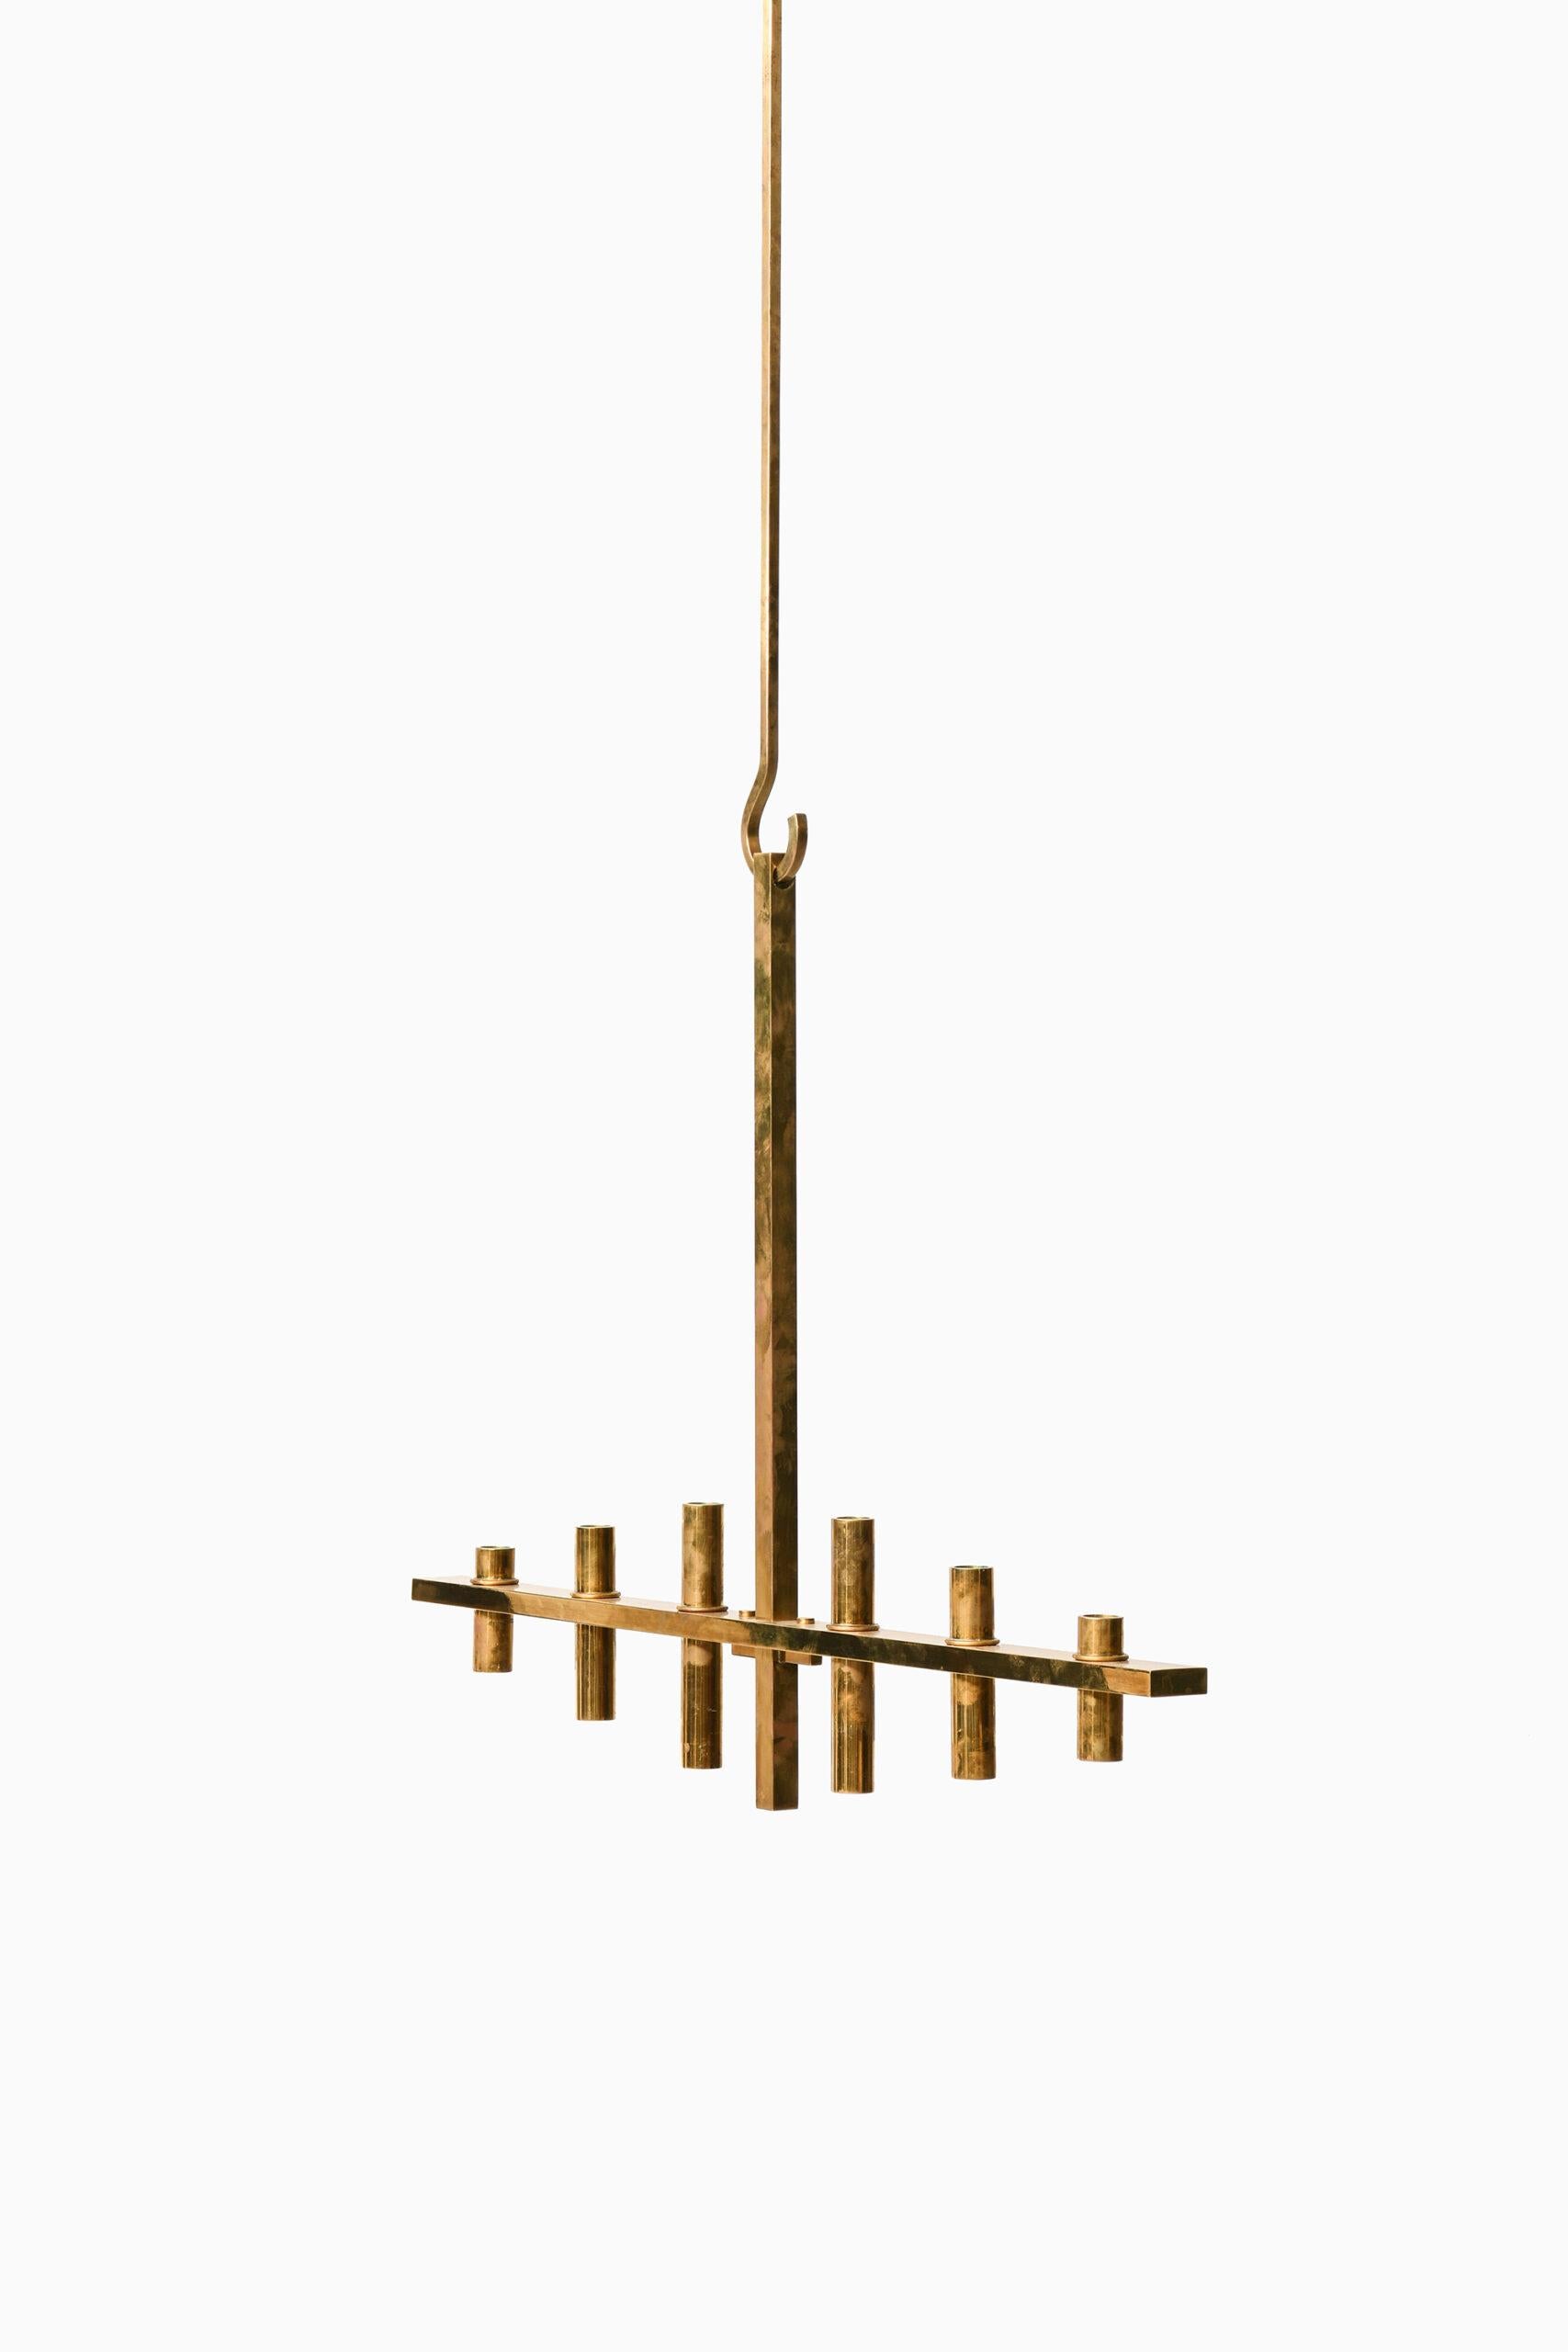 Rare large hanging chandelier in the manner of Hans-Agne Jakobsson. Probably produced by Hans-Agne Jakobsson AB in Markaryd, Sweden.